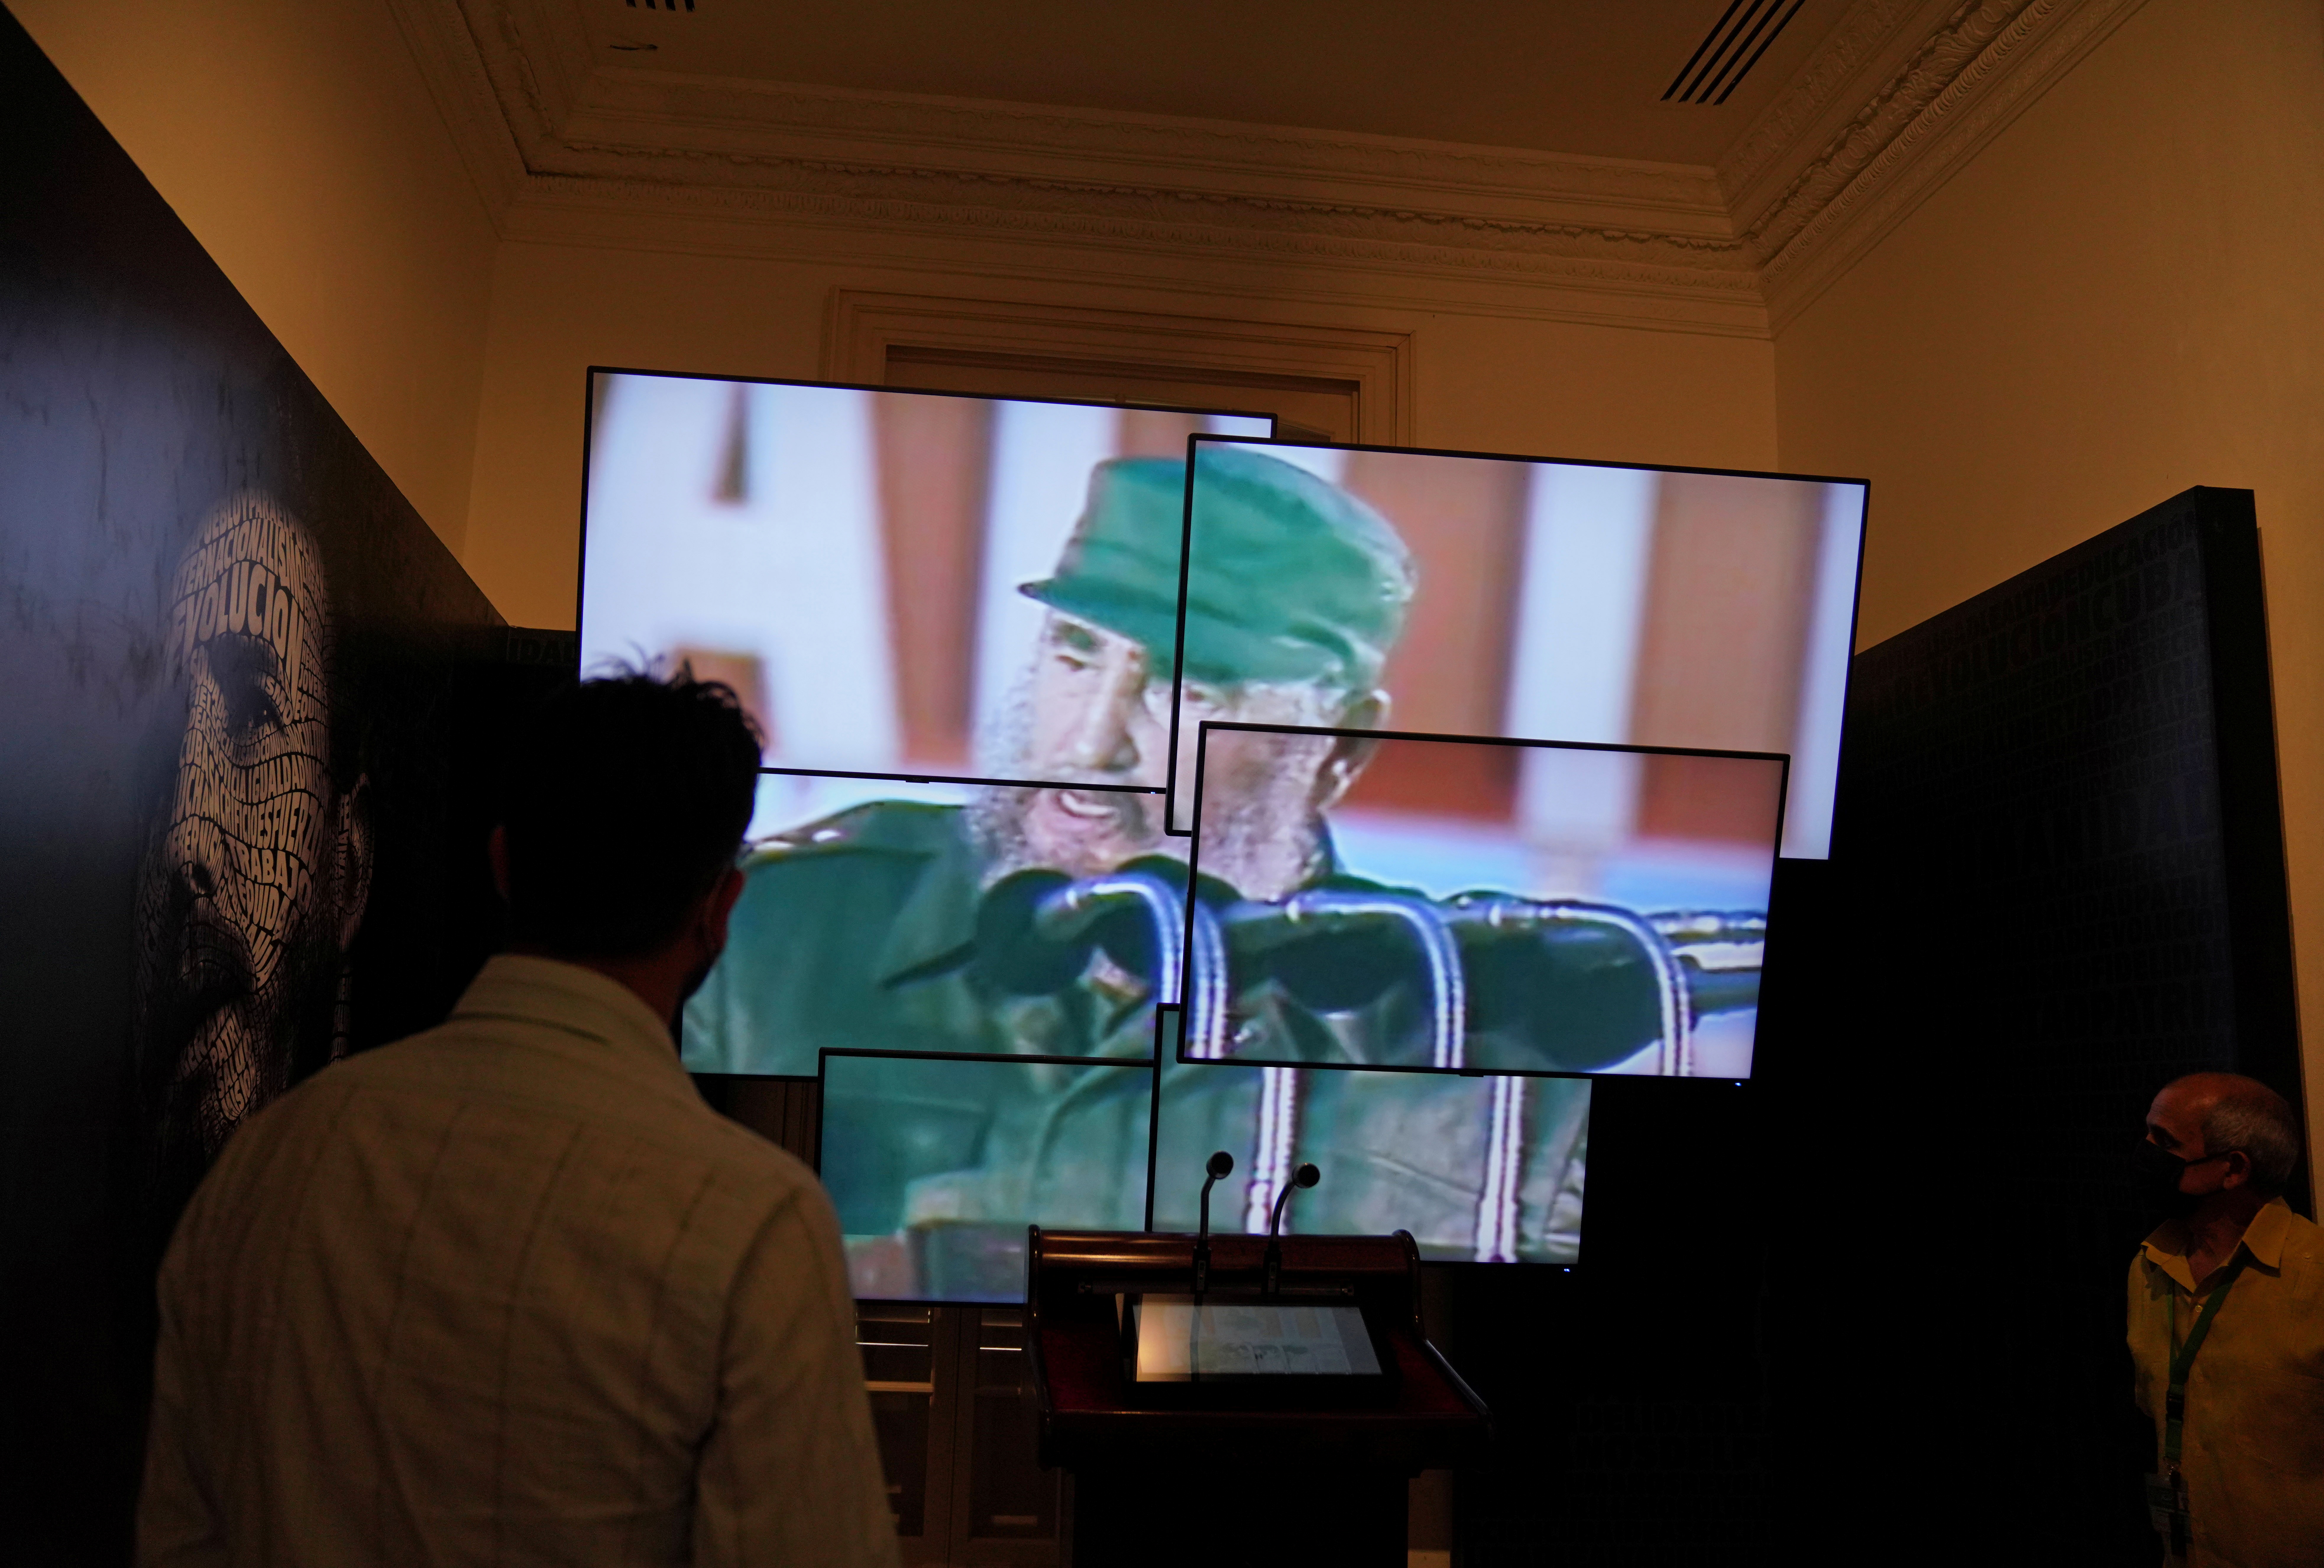 People look at a video display of Cuba's late leader Fidel Castro at the museum 